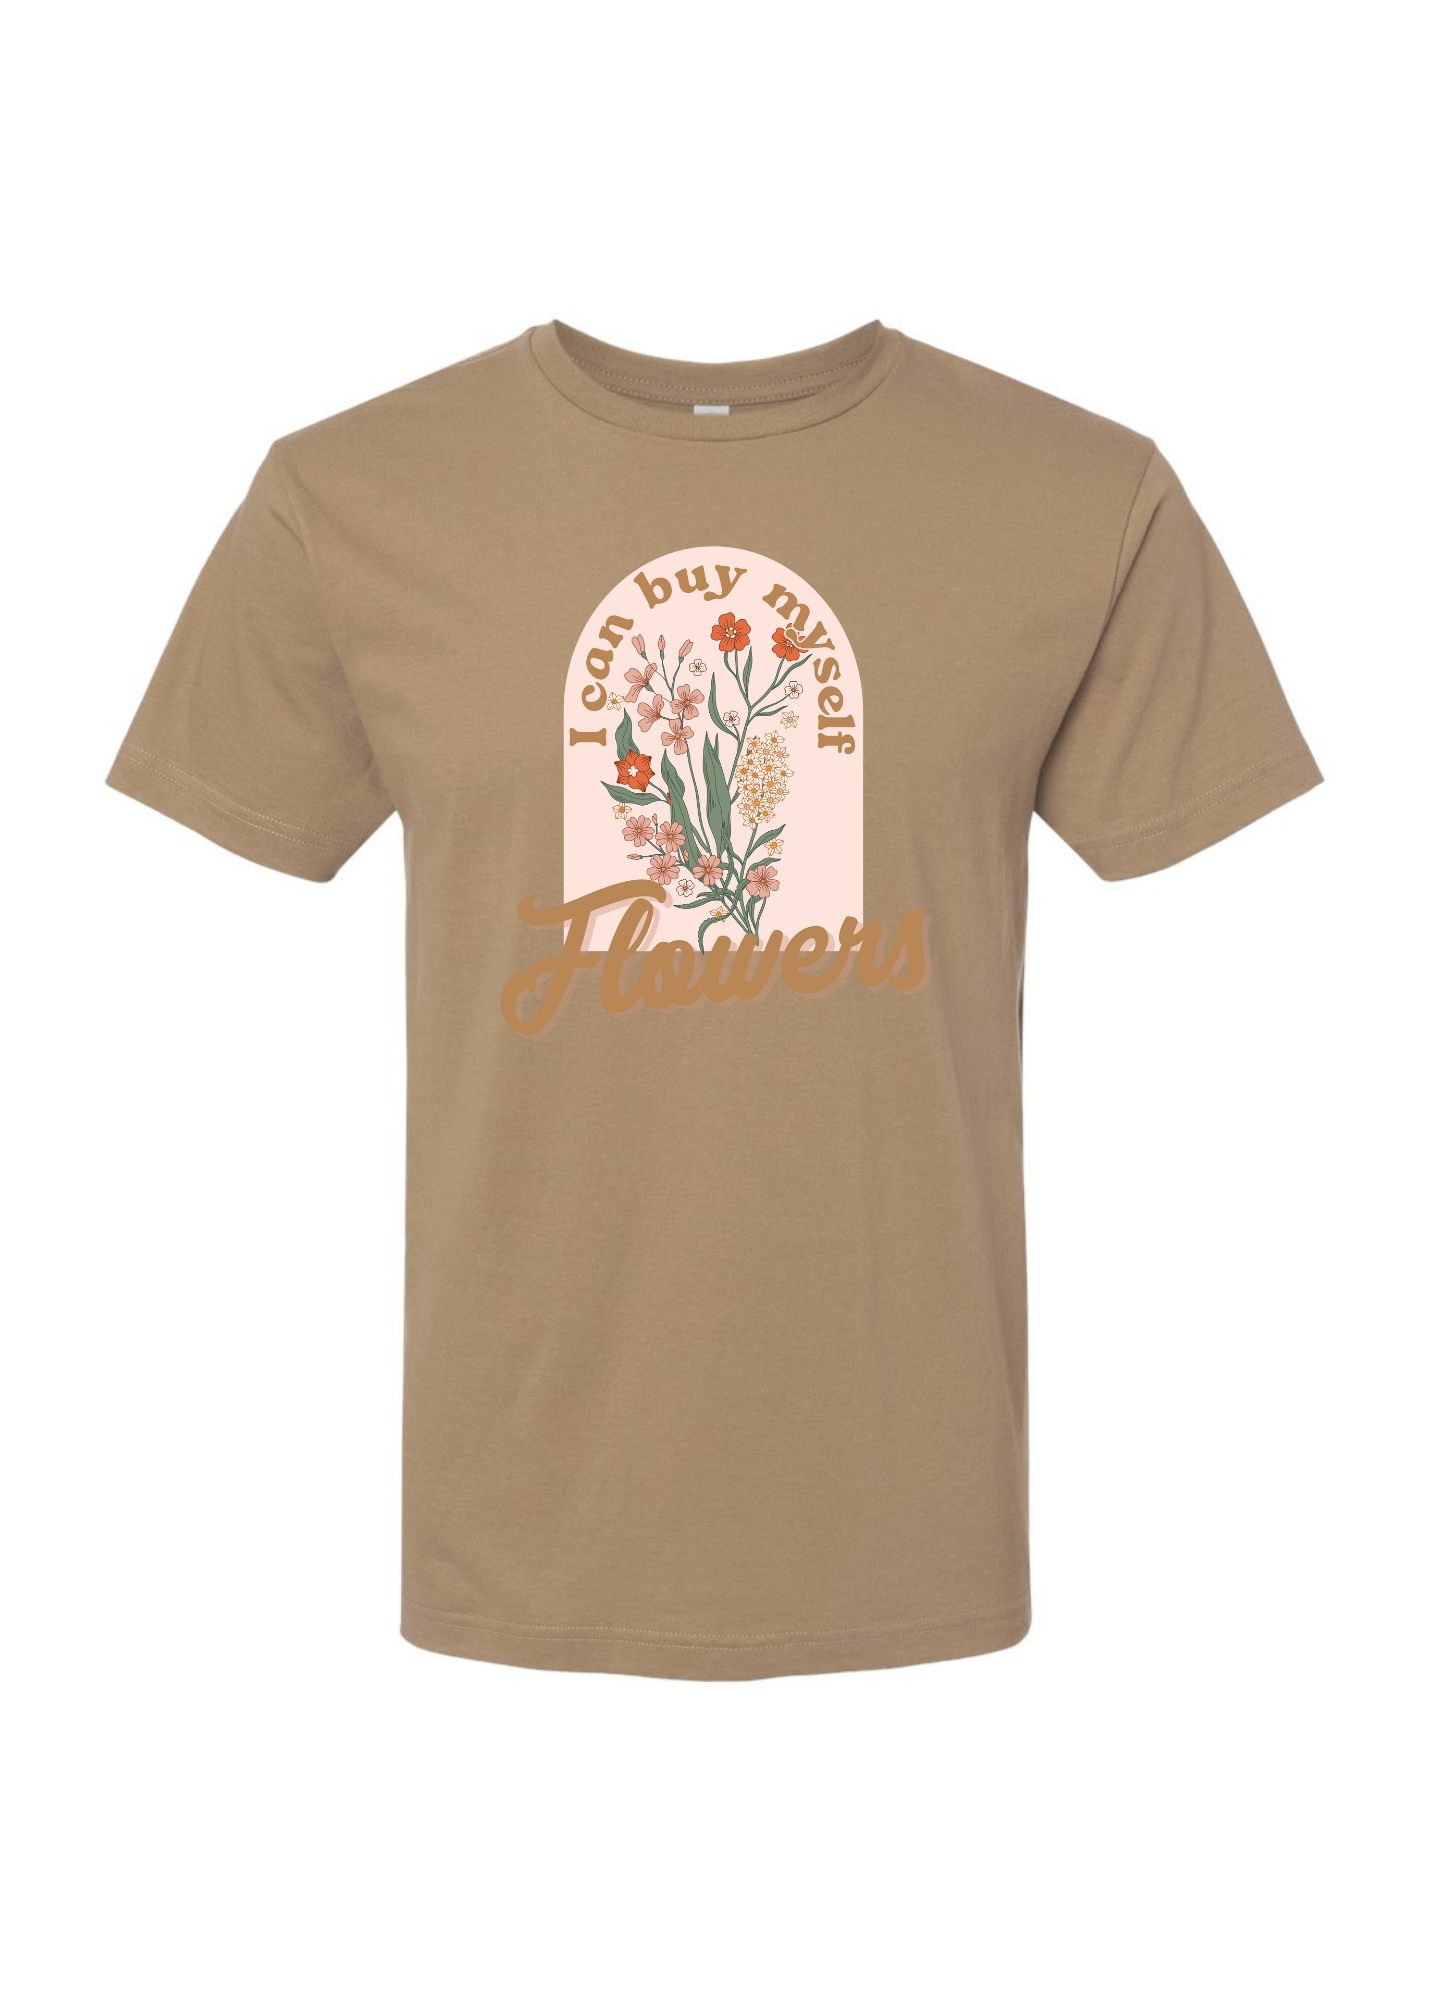 I Can Buy Myself Flowers | Tee | Adult-Sister Shirts-Sister Shirts, Cute & Custom Tees for Mama & Littles in Trussville, Alabama.